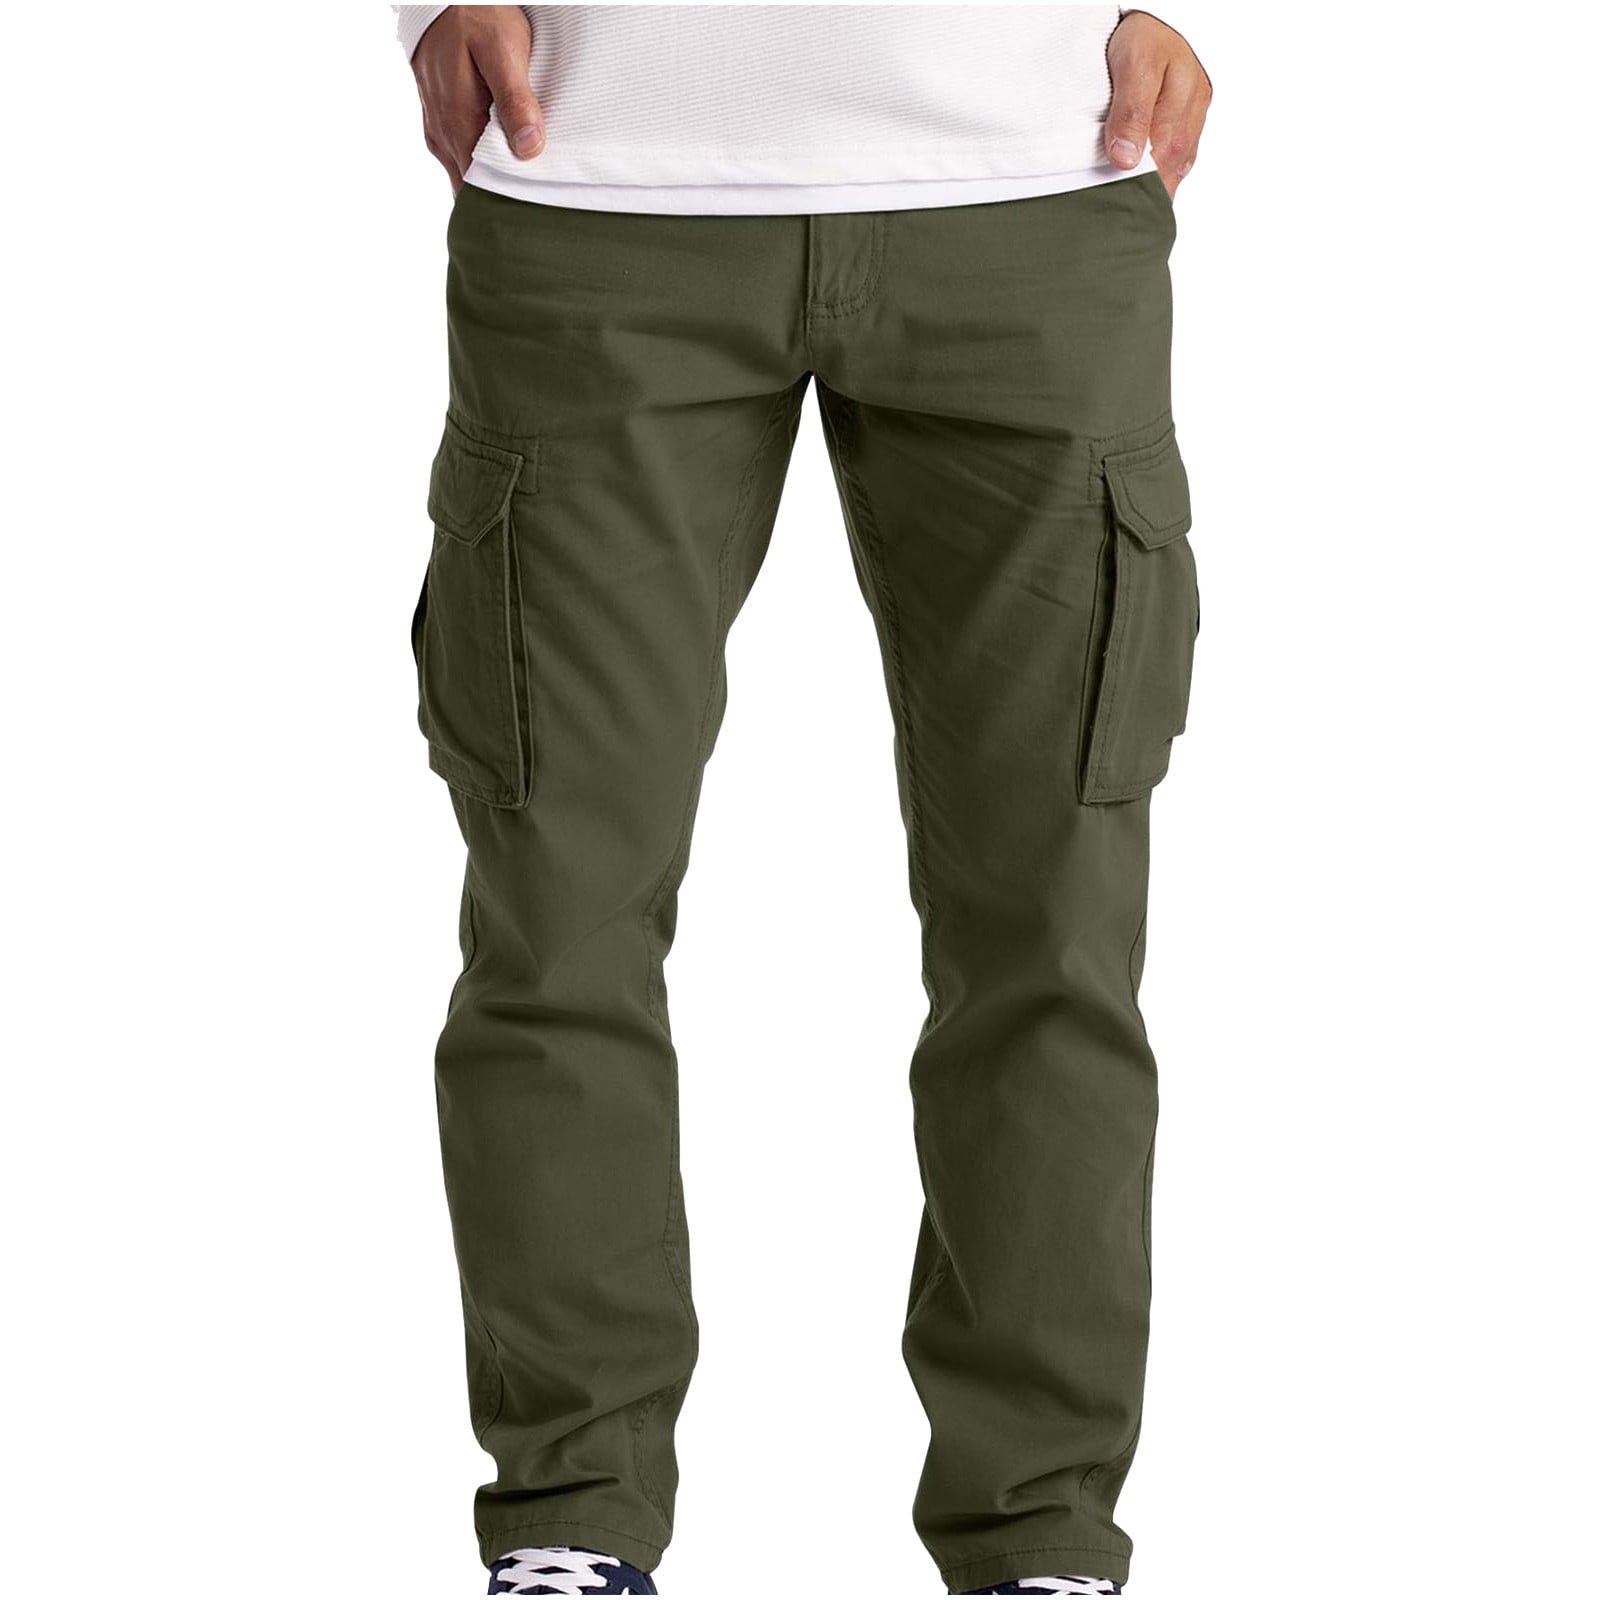 Mens Combat Work Pants Thick Fleece Line Thermal Bottoms Casual Cargo  Trousers | eBay